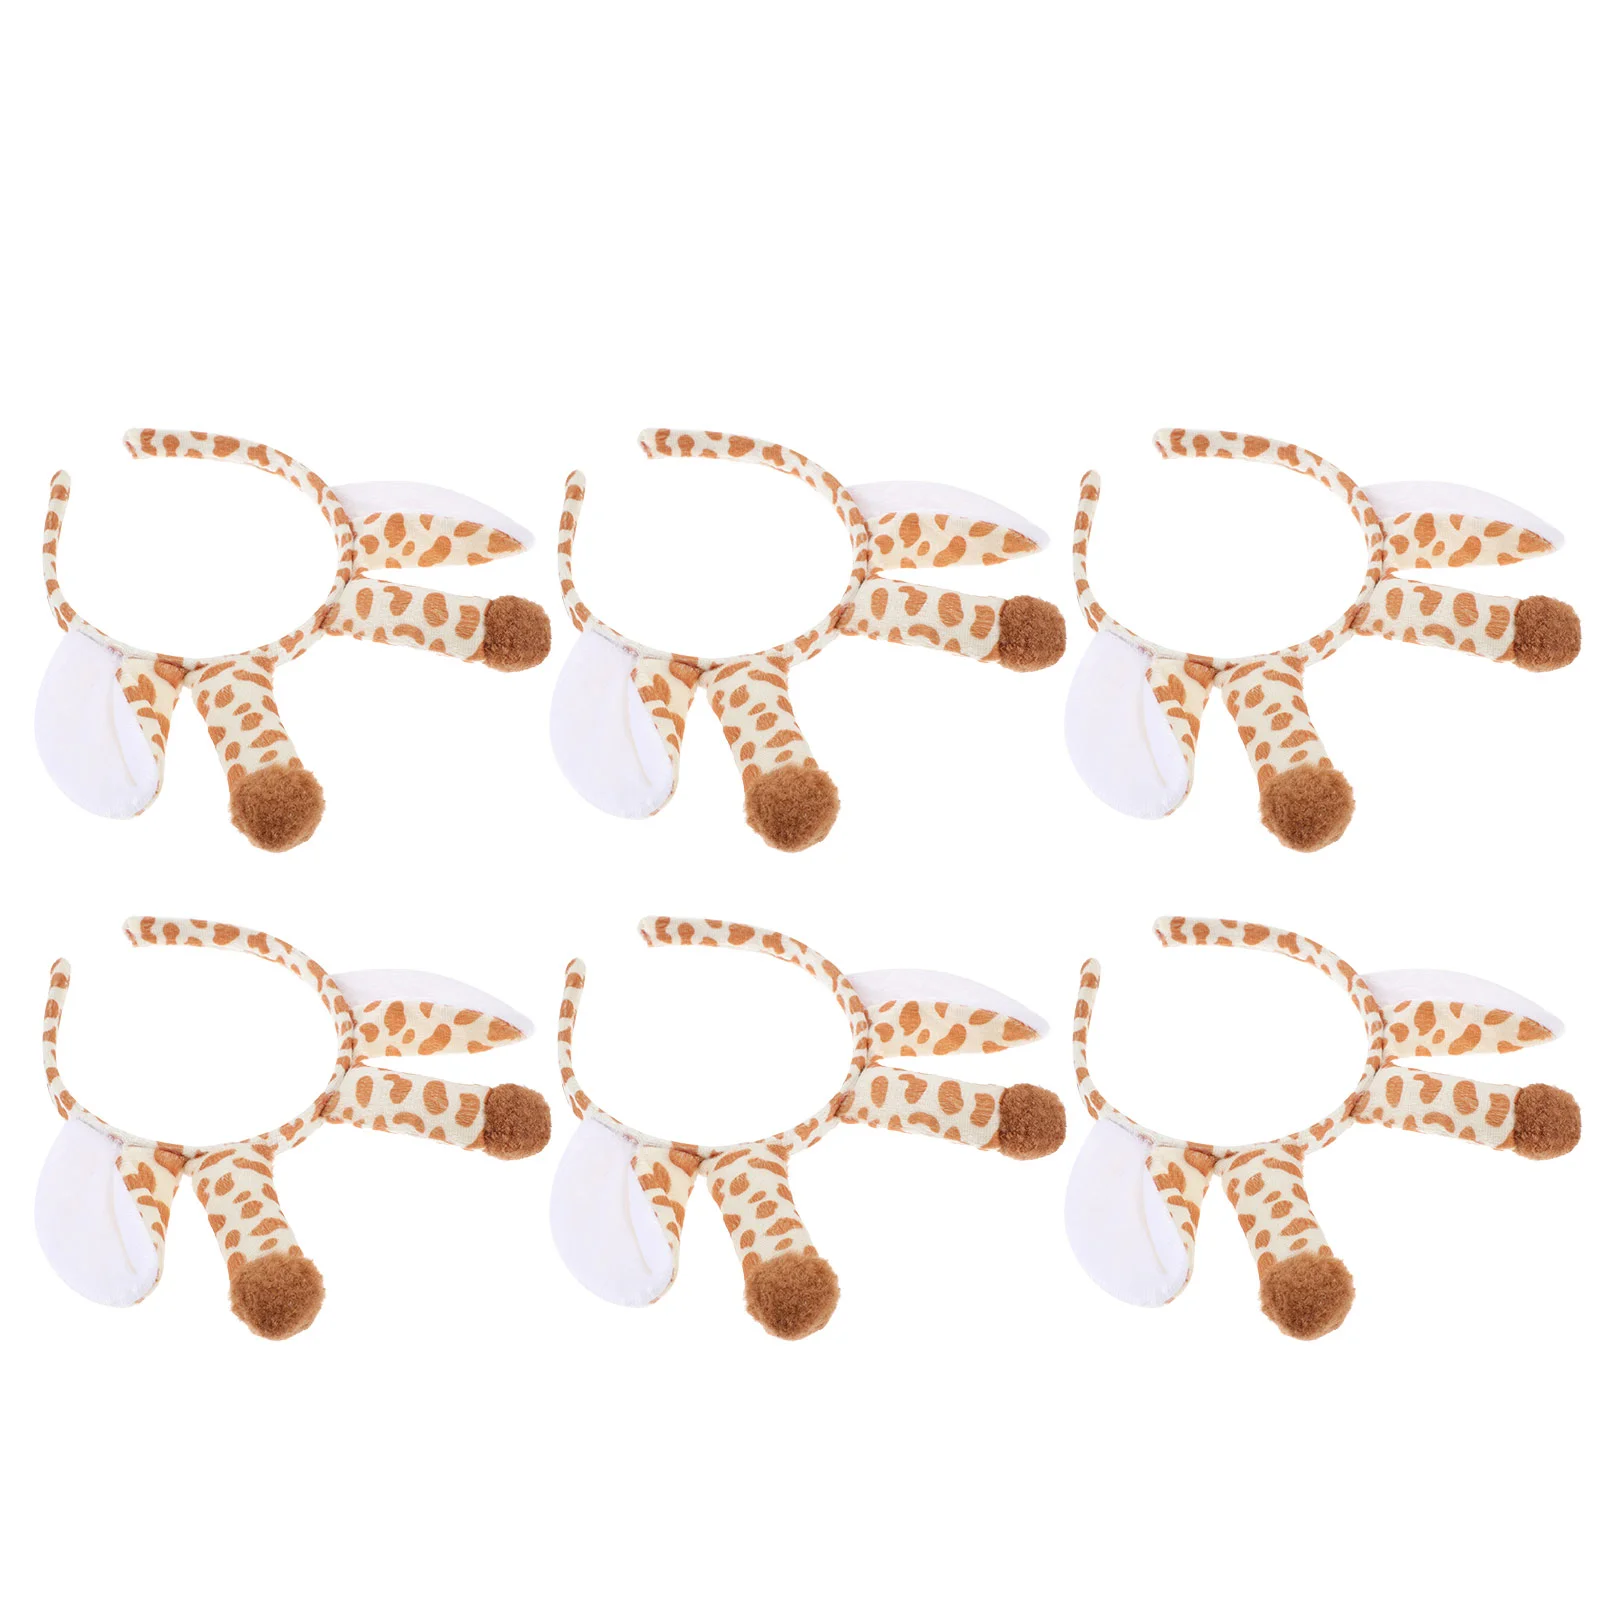 6 Pcs Animal Headband Lovely Hair Wear Decorate Christmas Party Hoops Accessories Girls Headdress Cloth for Kids Miss rgb gx53 led light 85 265v ac cabinet bulb 4w lamp with control remote decorate bedroom party garland for indoor lighting